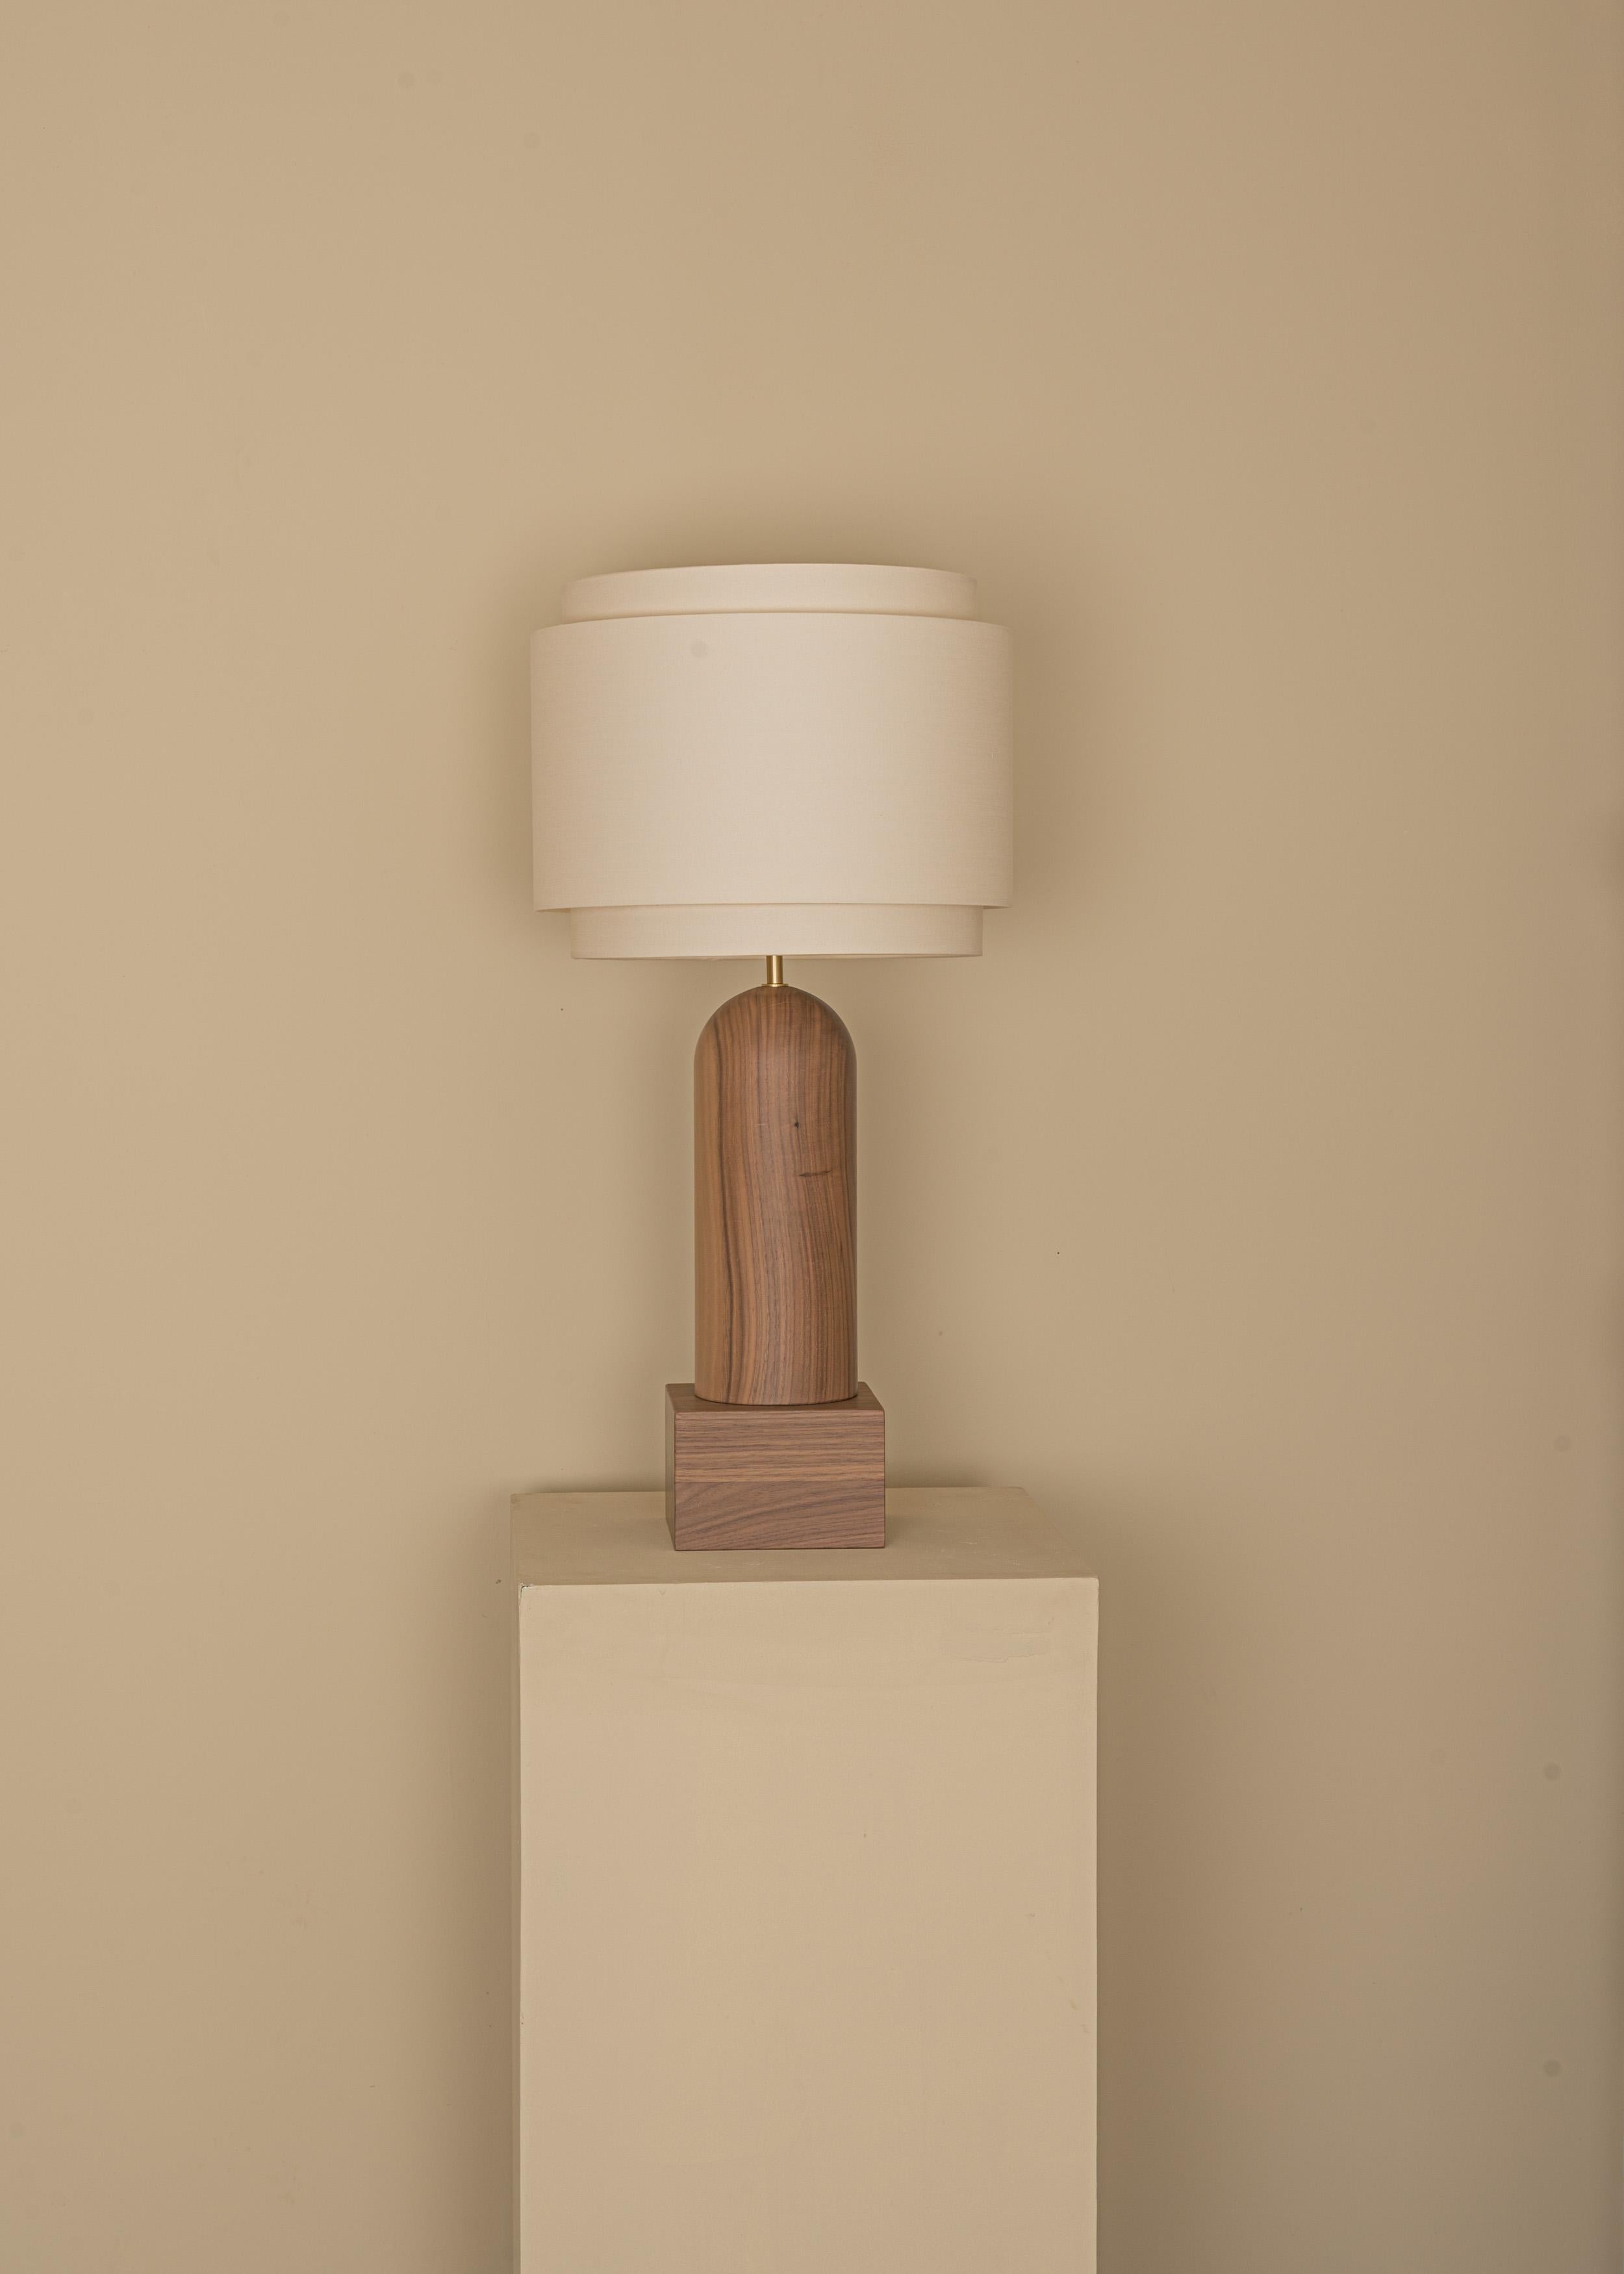 Walnut Pura Kelo Double Table Lamp by Simone & Marcel
Dimensions: D 35 x W 35 x H 69 cm.
Materials: Brass, cotton and walnut.

Also available in different marble, wood and alabaster options and finishes. Custom options available on request. Please